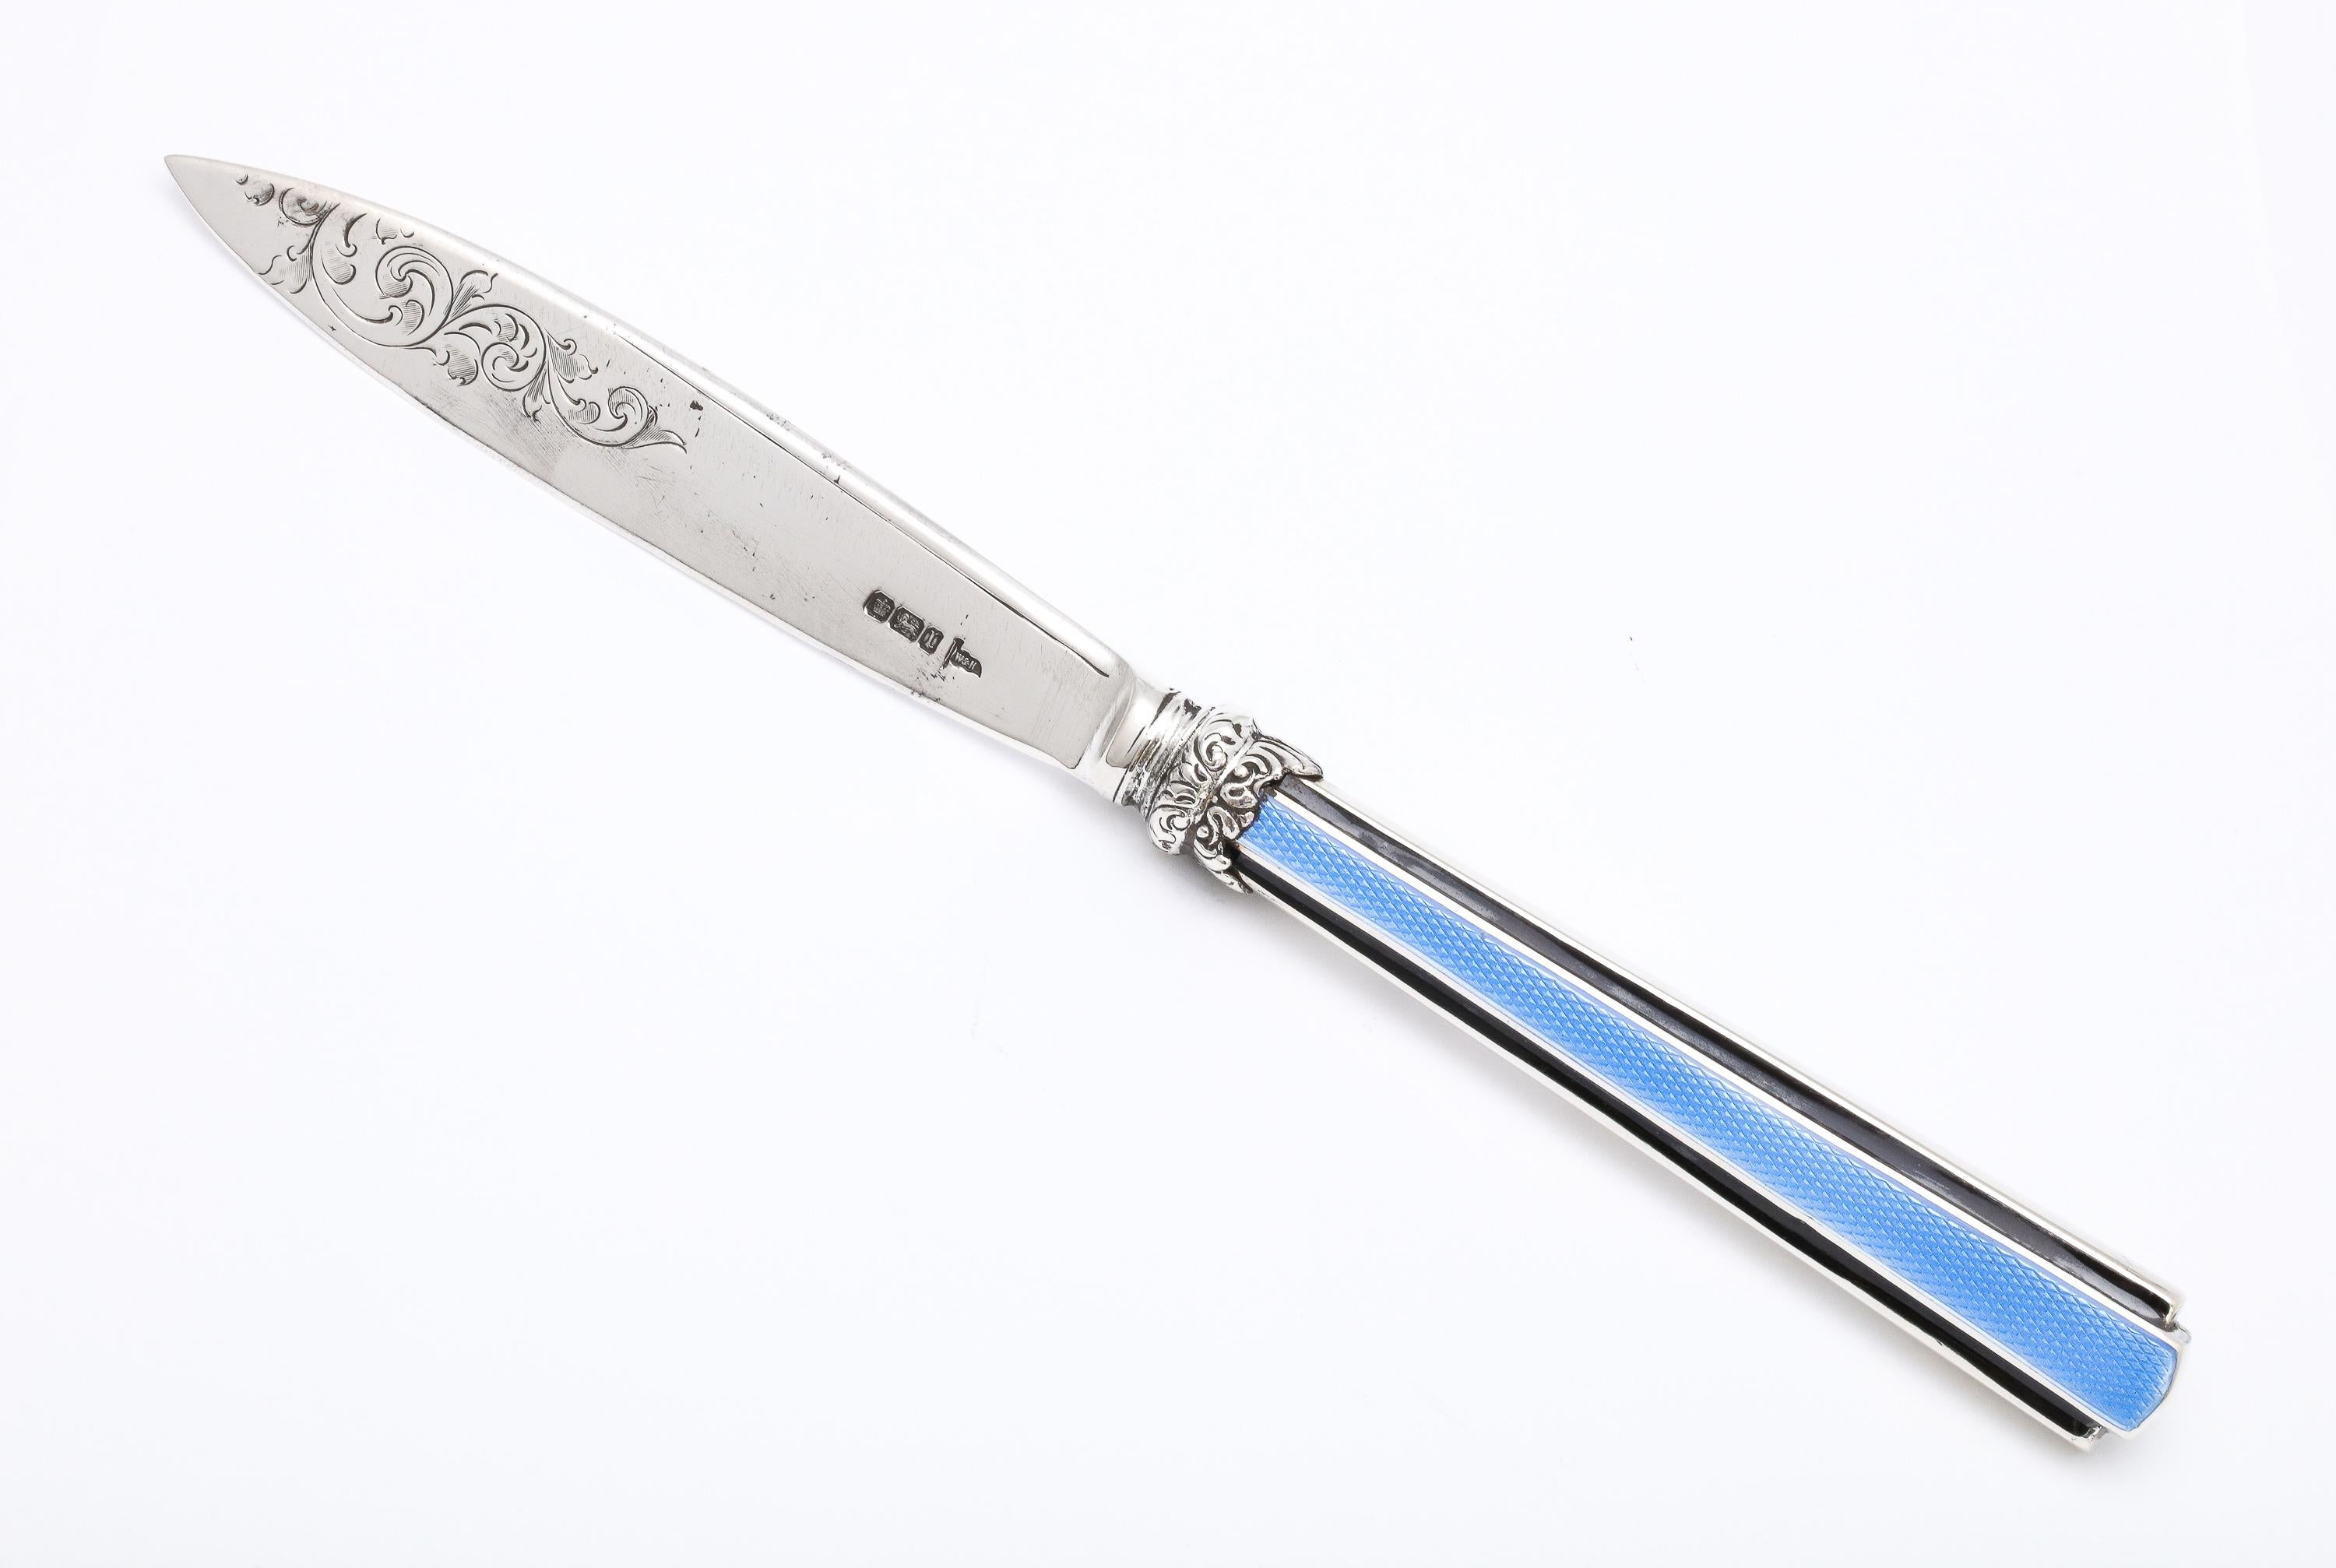 Edwardian, sterling silver and blue and black guilloche enamel-mounted letter opener/paper knife, Sheffield, England, year hallmarked for 1903, Walker and Hall - makers. Sterling silver blade is etched. Measures 9 inches long x 3.4 inches wide (at